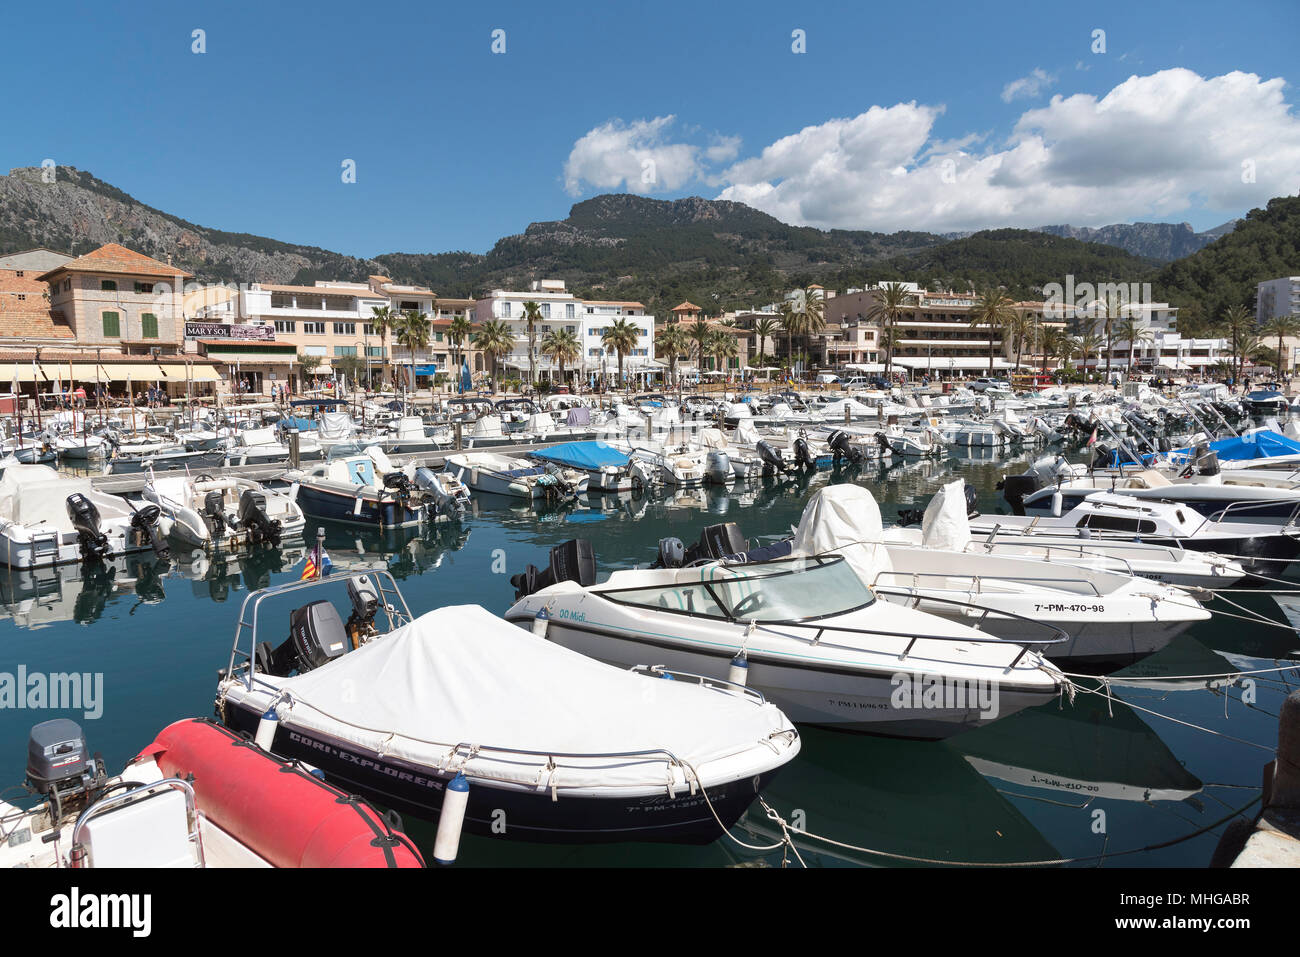 Port de Soller, Mallorca, Balearic Island, Spain. 2018. The seafront and harbour at Port de Soller a popular holiday resort in Mallorca. Stock Photo